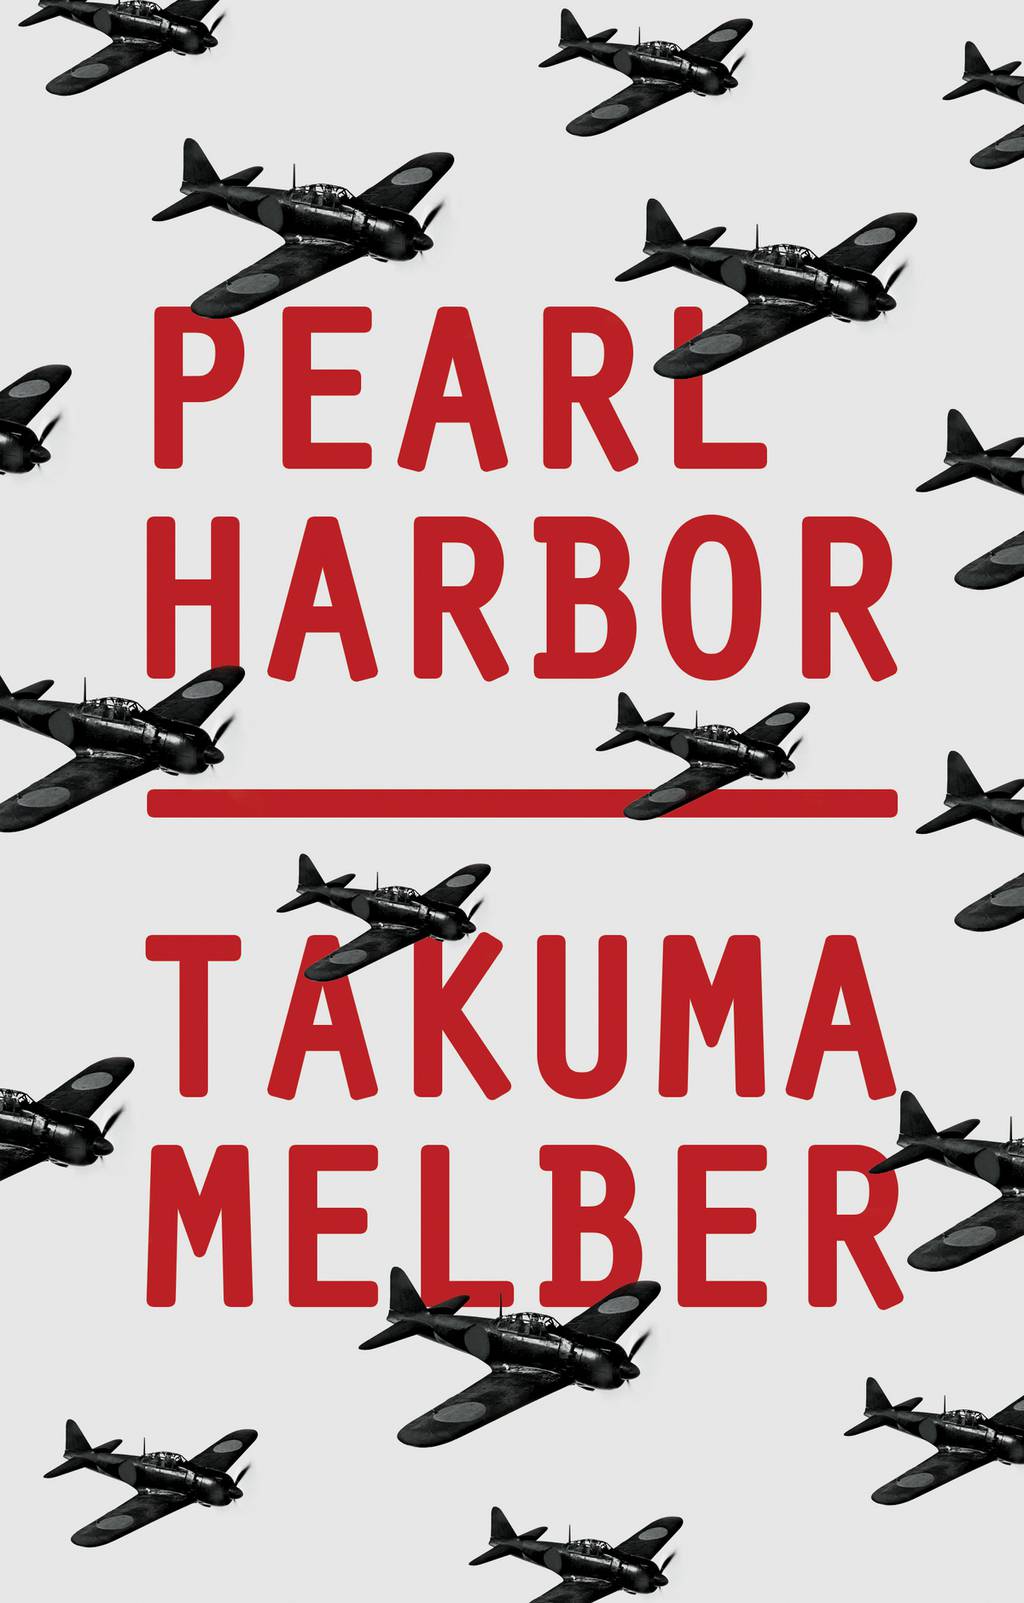 New Pearl Harbor book tells the Japanese side of events in fateful attack